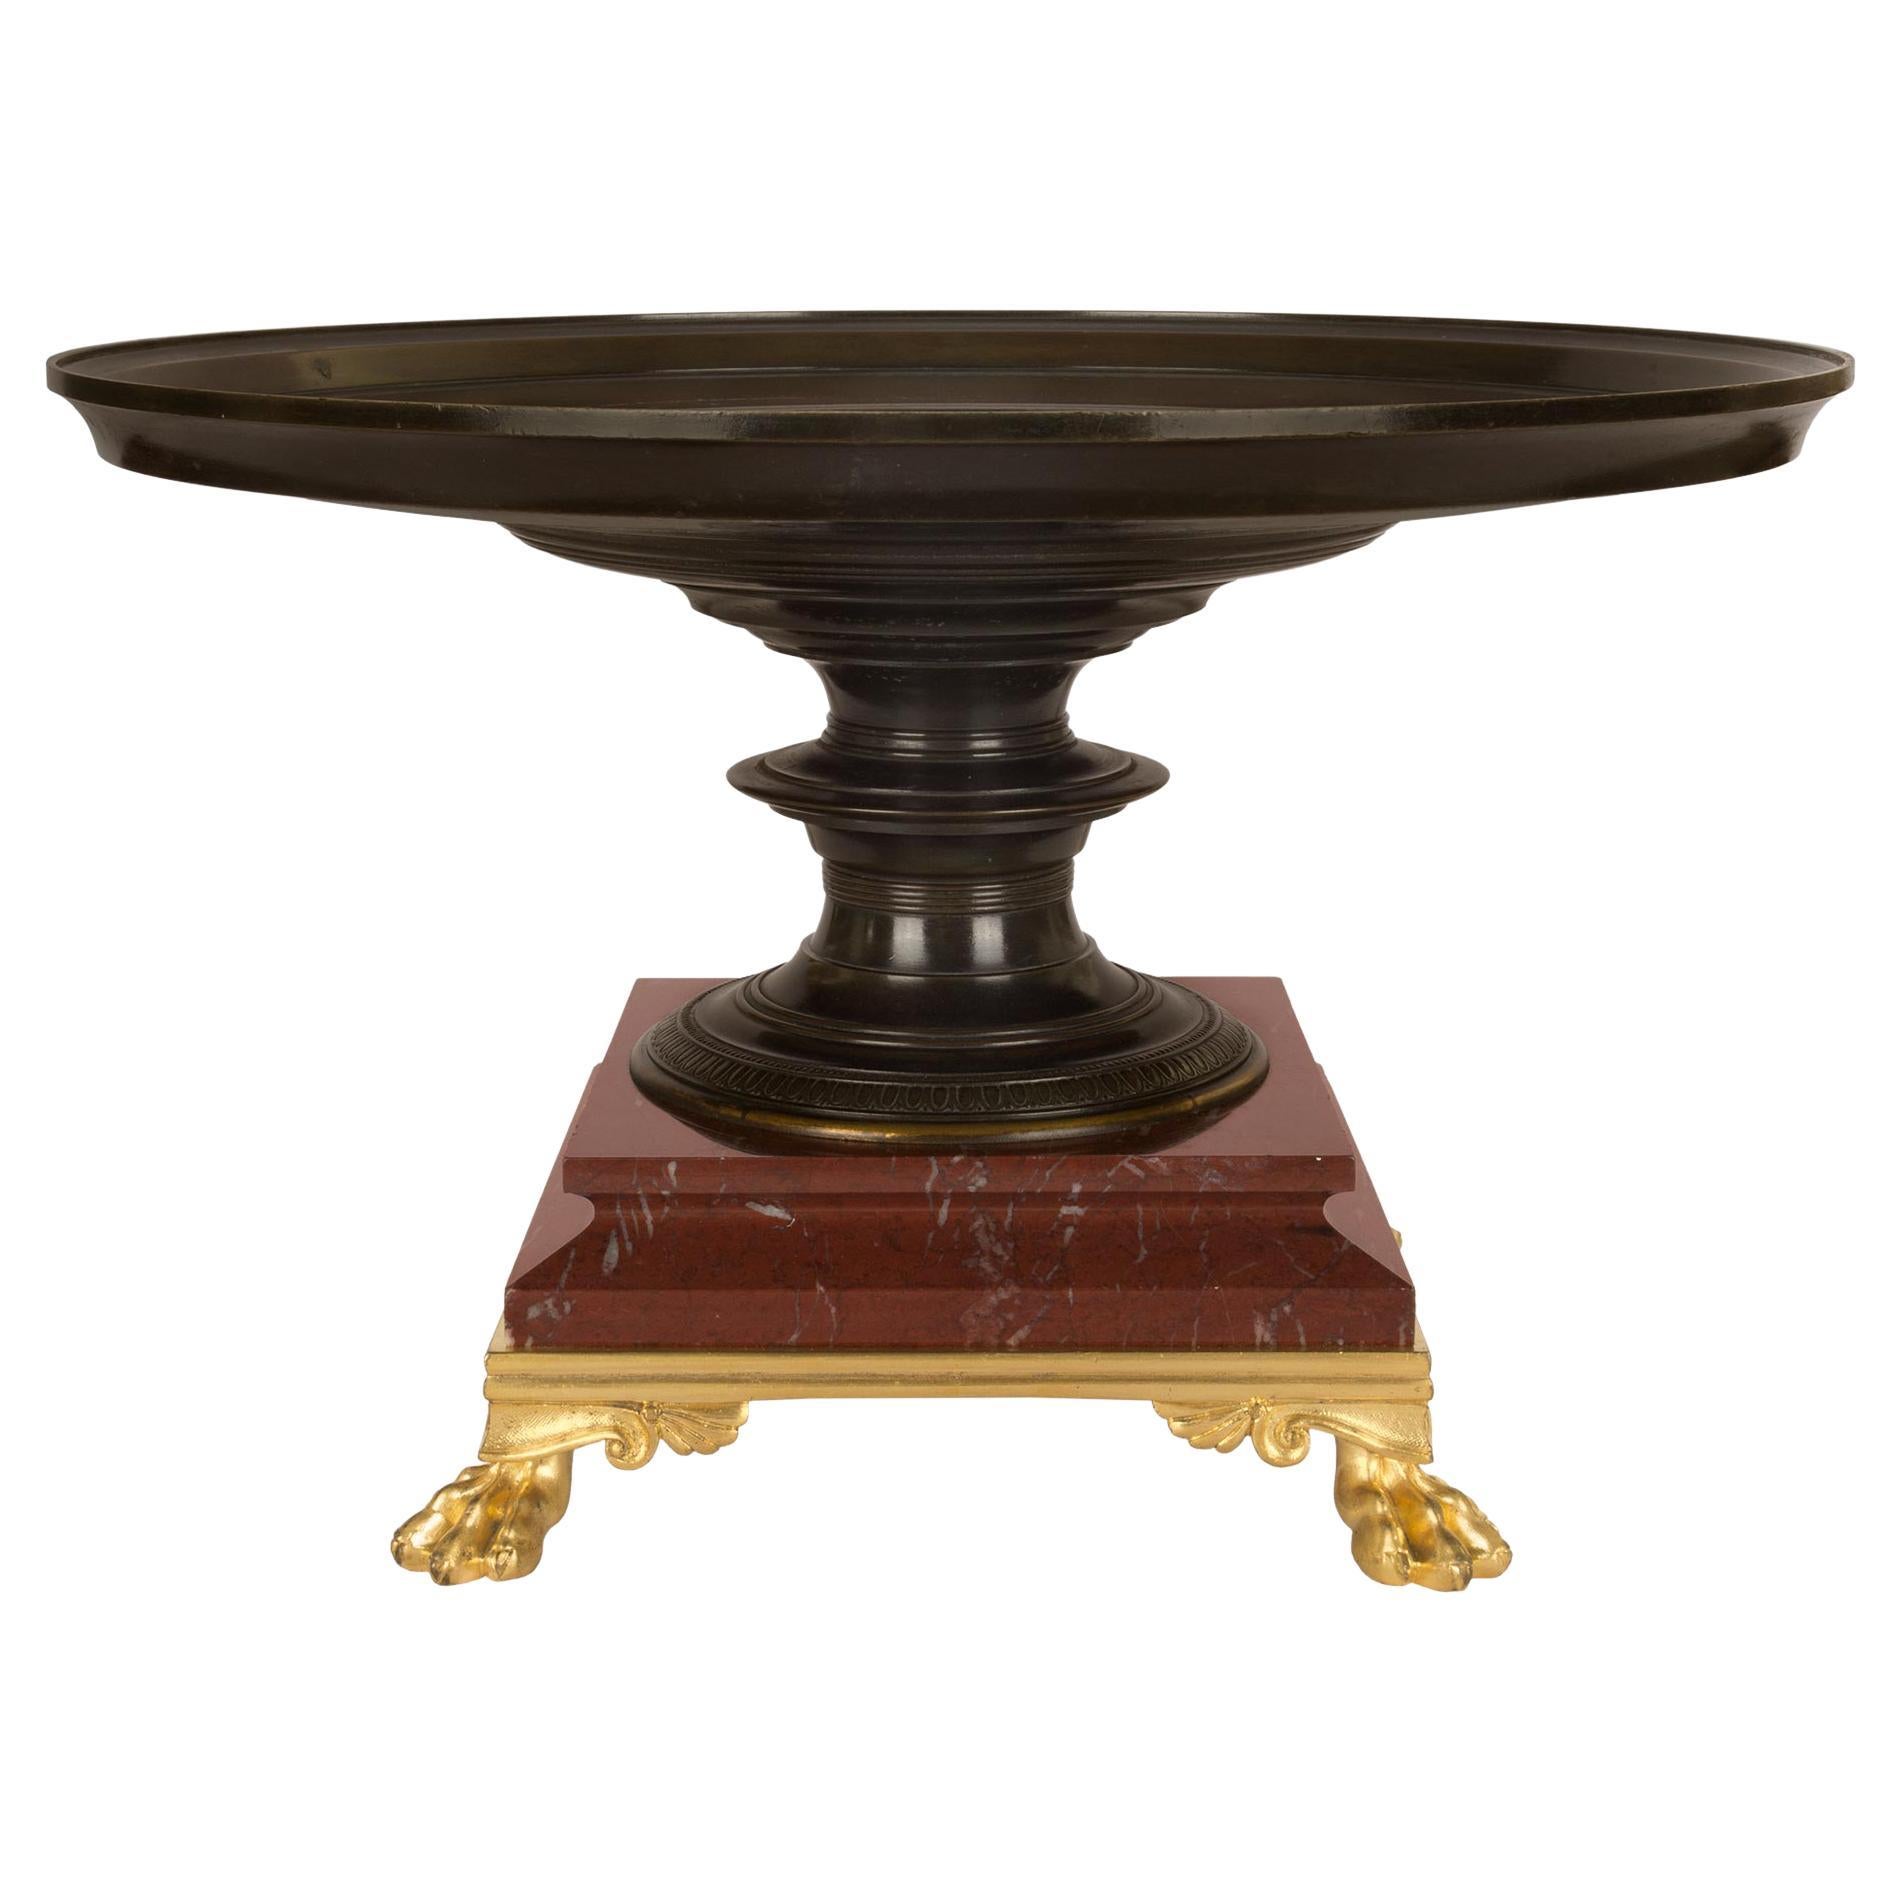 French 19th Century Grand Tour Period Patinated Bronze, Marble and Ormolu Tazza